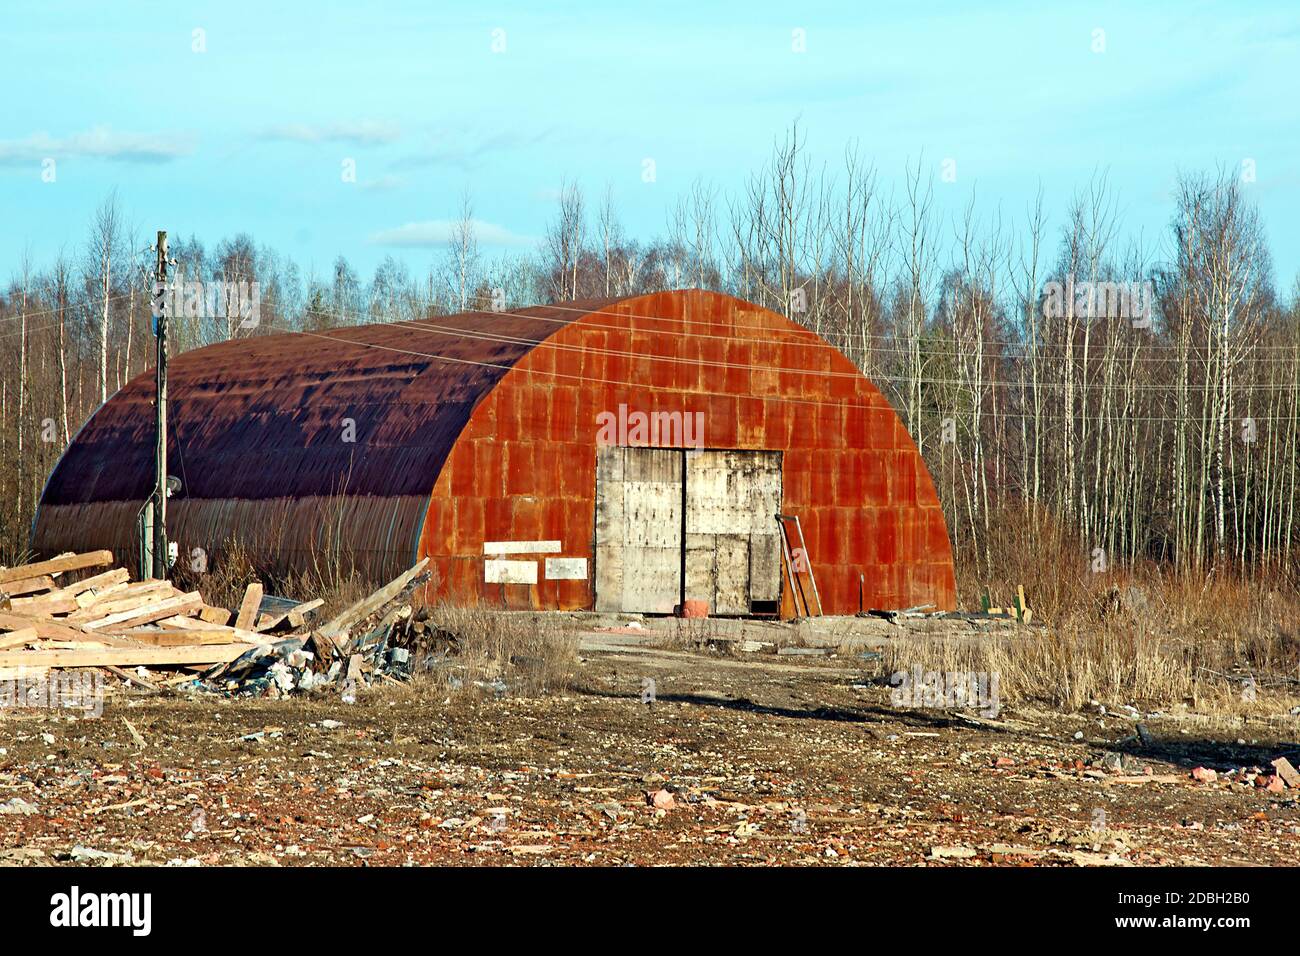 View of an old, rusty, abandoned hangar. An image of decrepitude or a natural disaster. Stock Photo